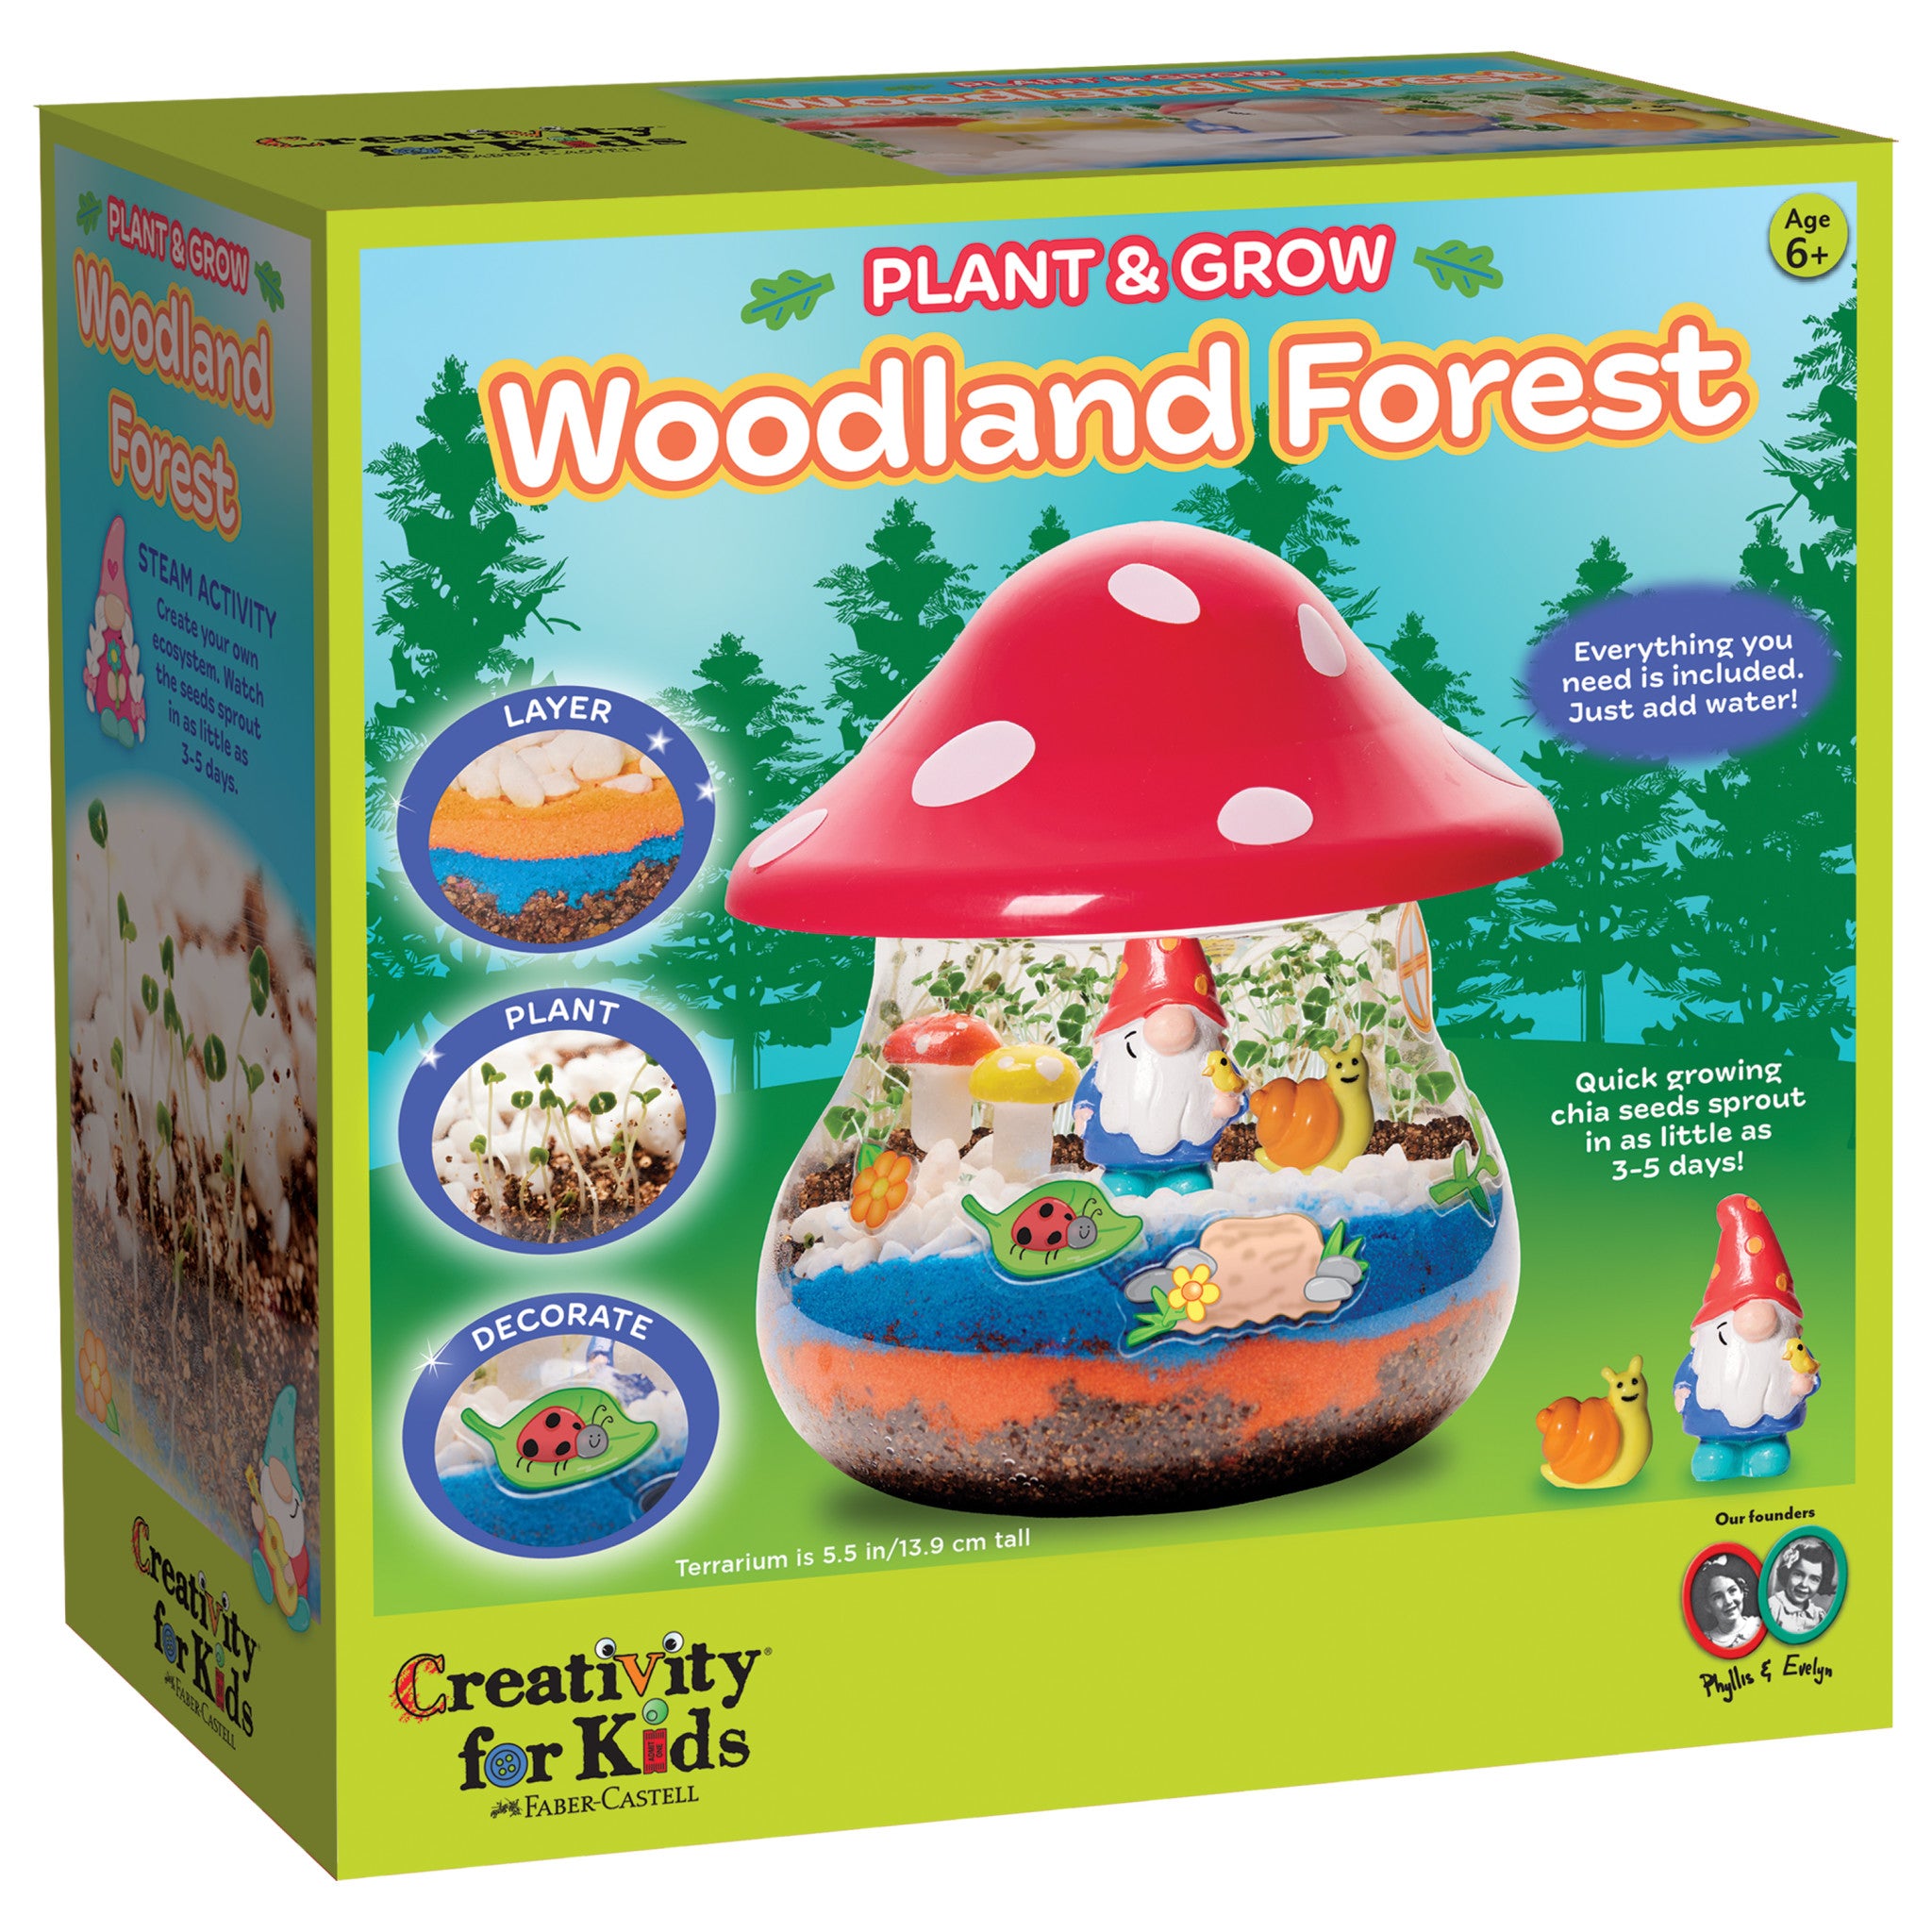 Plant and Grow Woodland Forest Kit